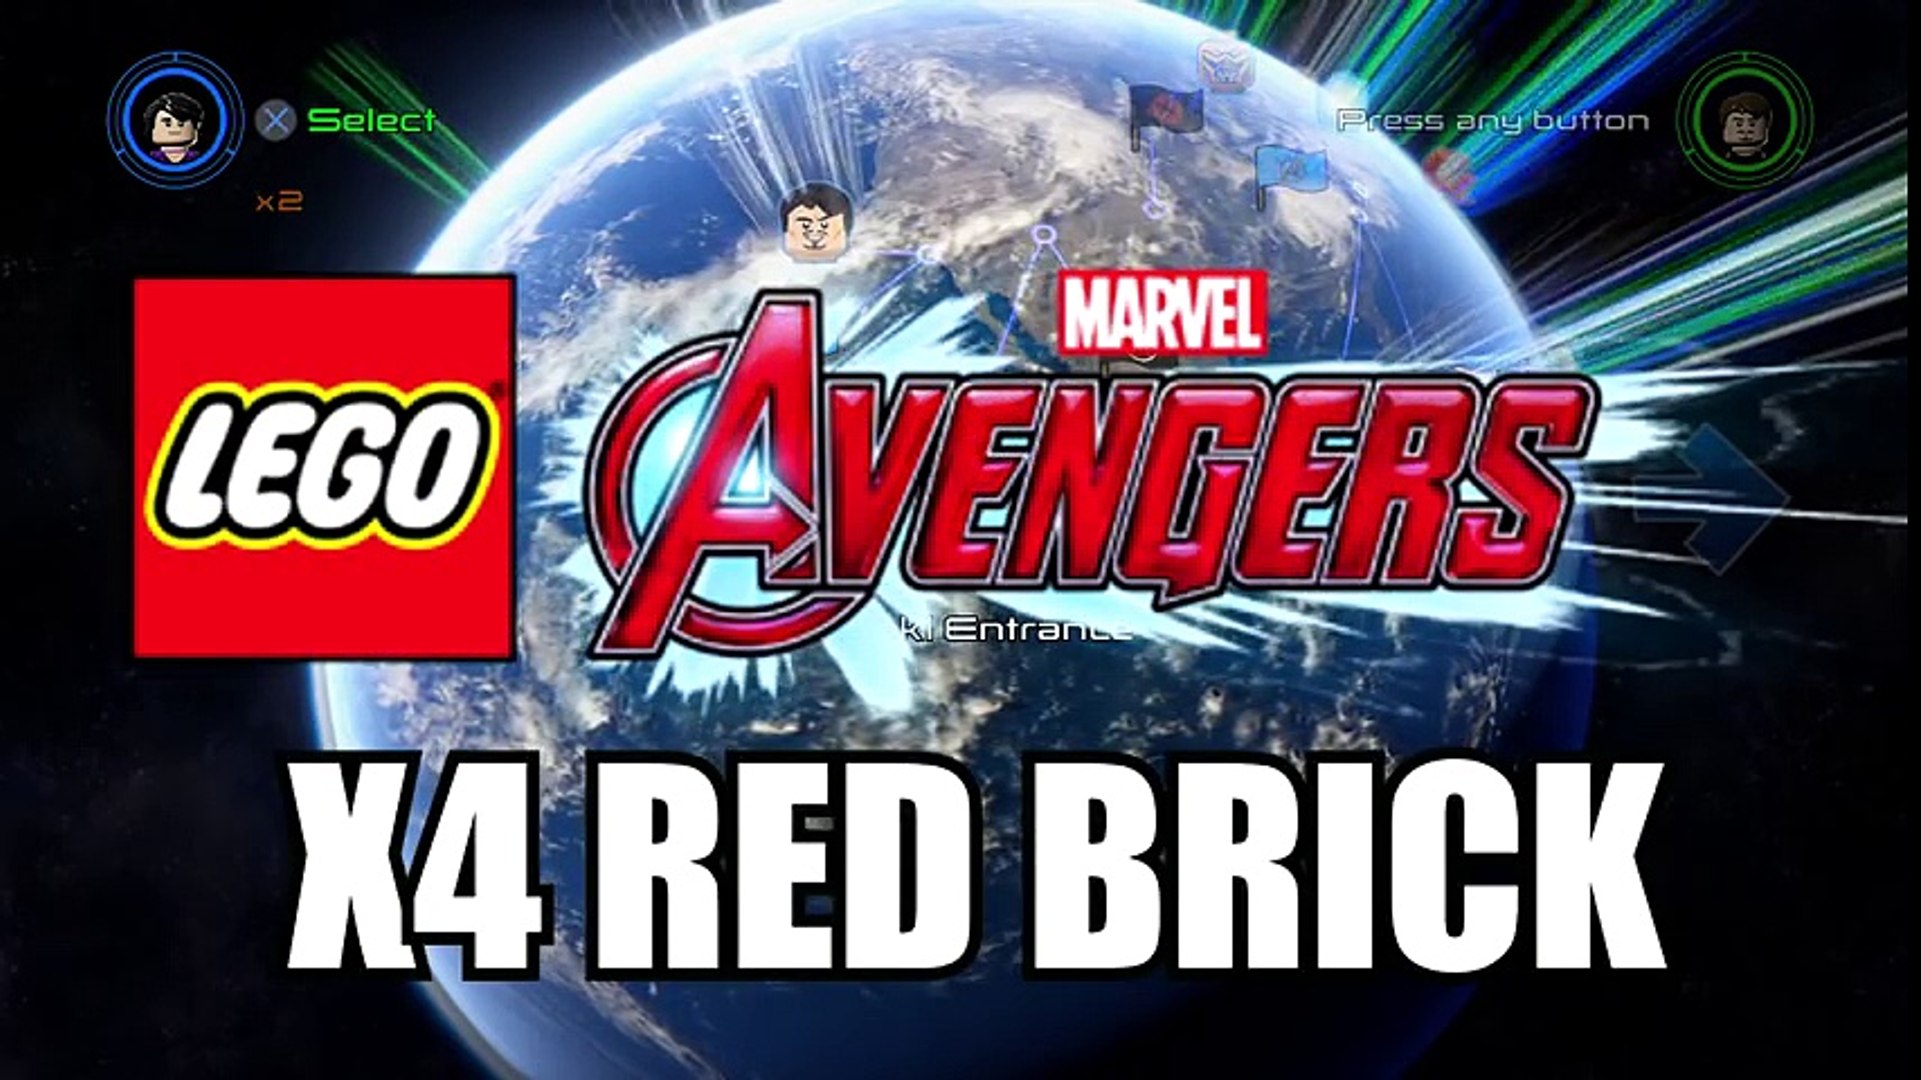 How Unlock x4 Studs Red Brick - LEGO Marvel's Avengers - video Dailymotion